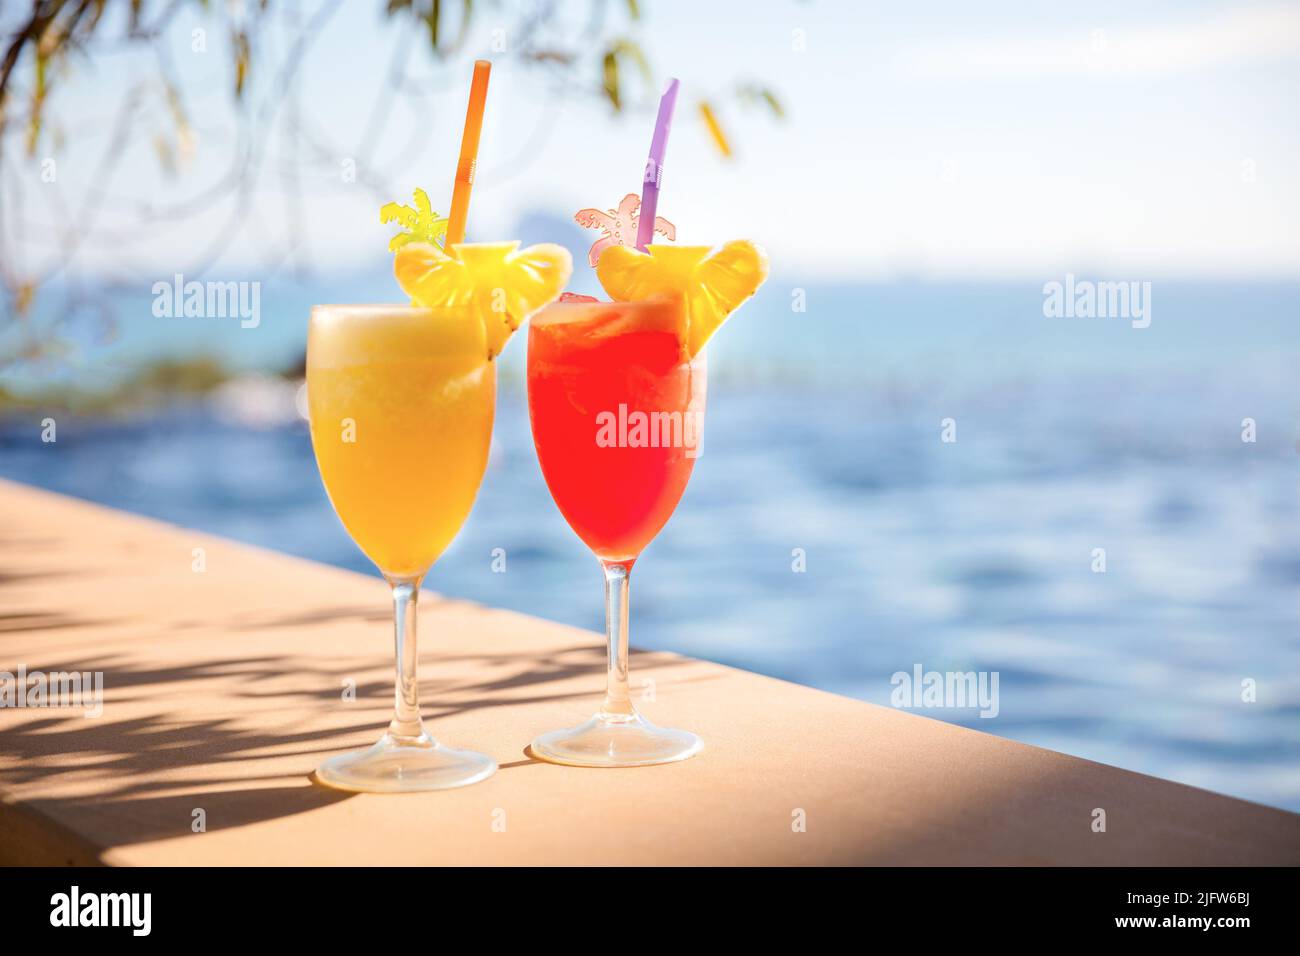 Mango And Watermelon Juices At Poolside On Sunny Day Stock Photo